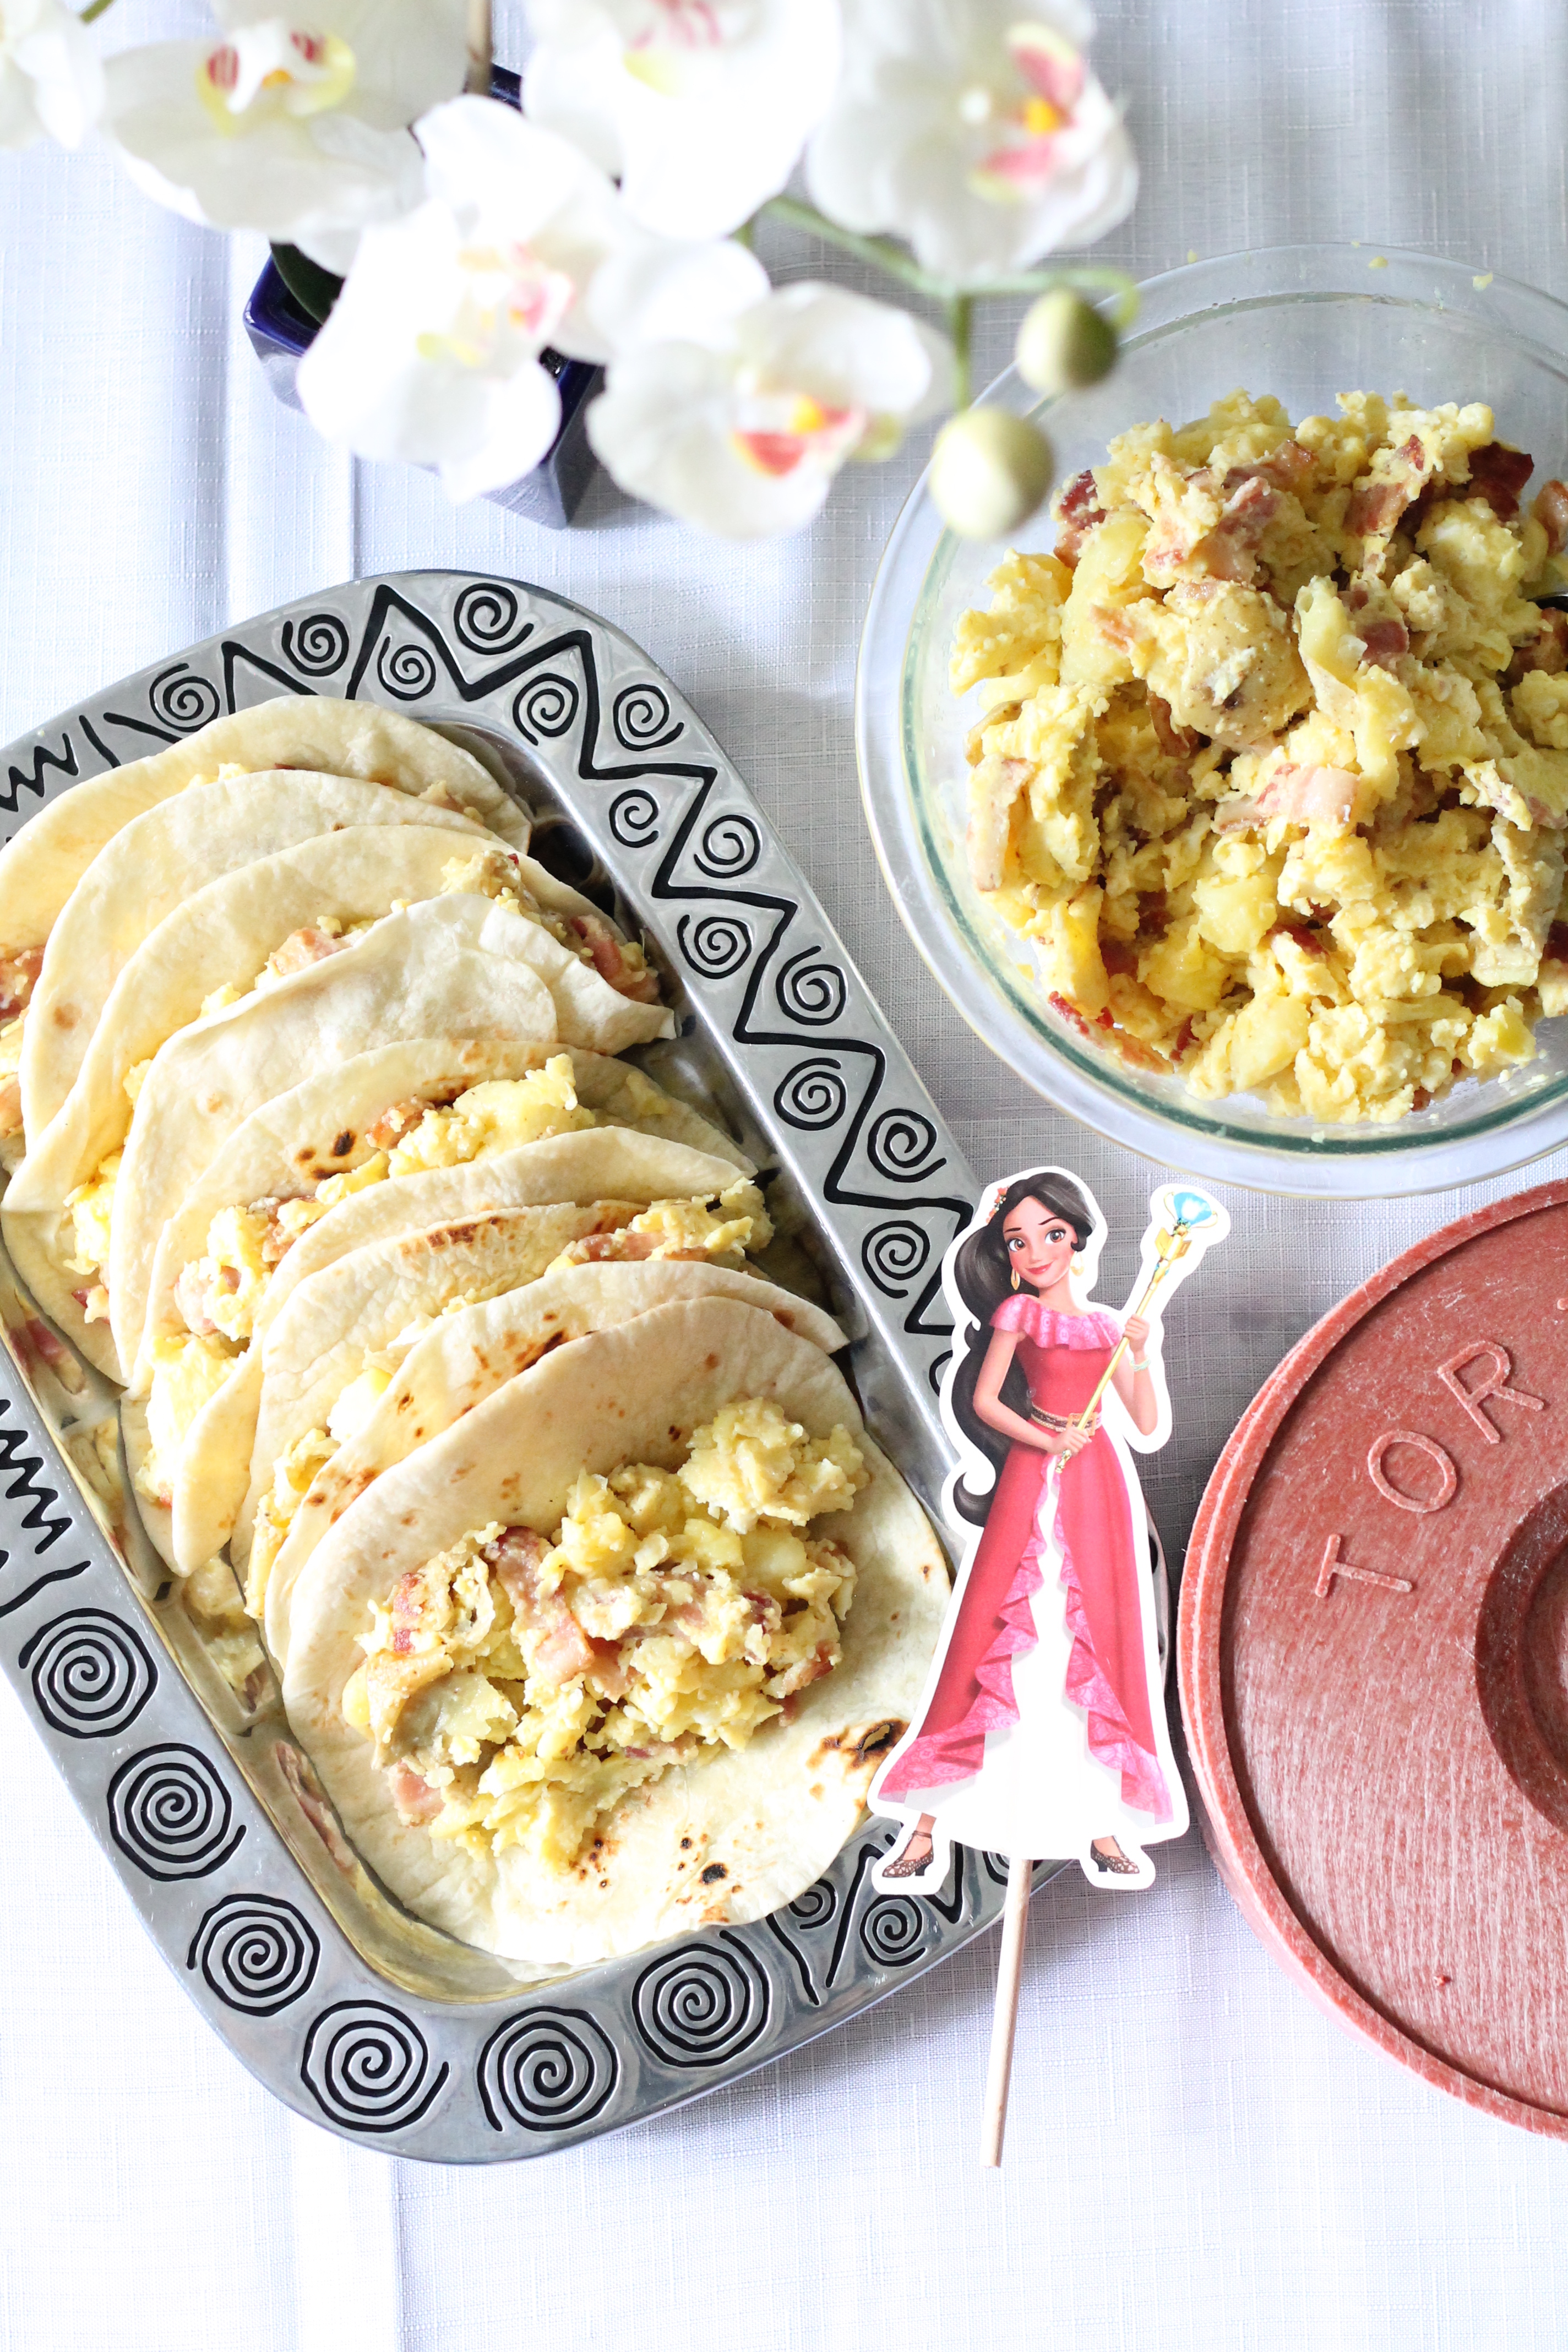 The perfect Tex-Mex breakfast tacos. Enjoy an Elena of Avalor breakfast fiesta with your little princess for a fun FRiYAY!